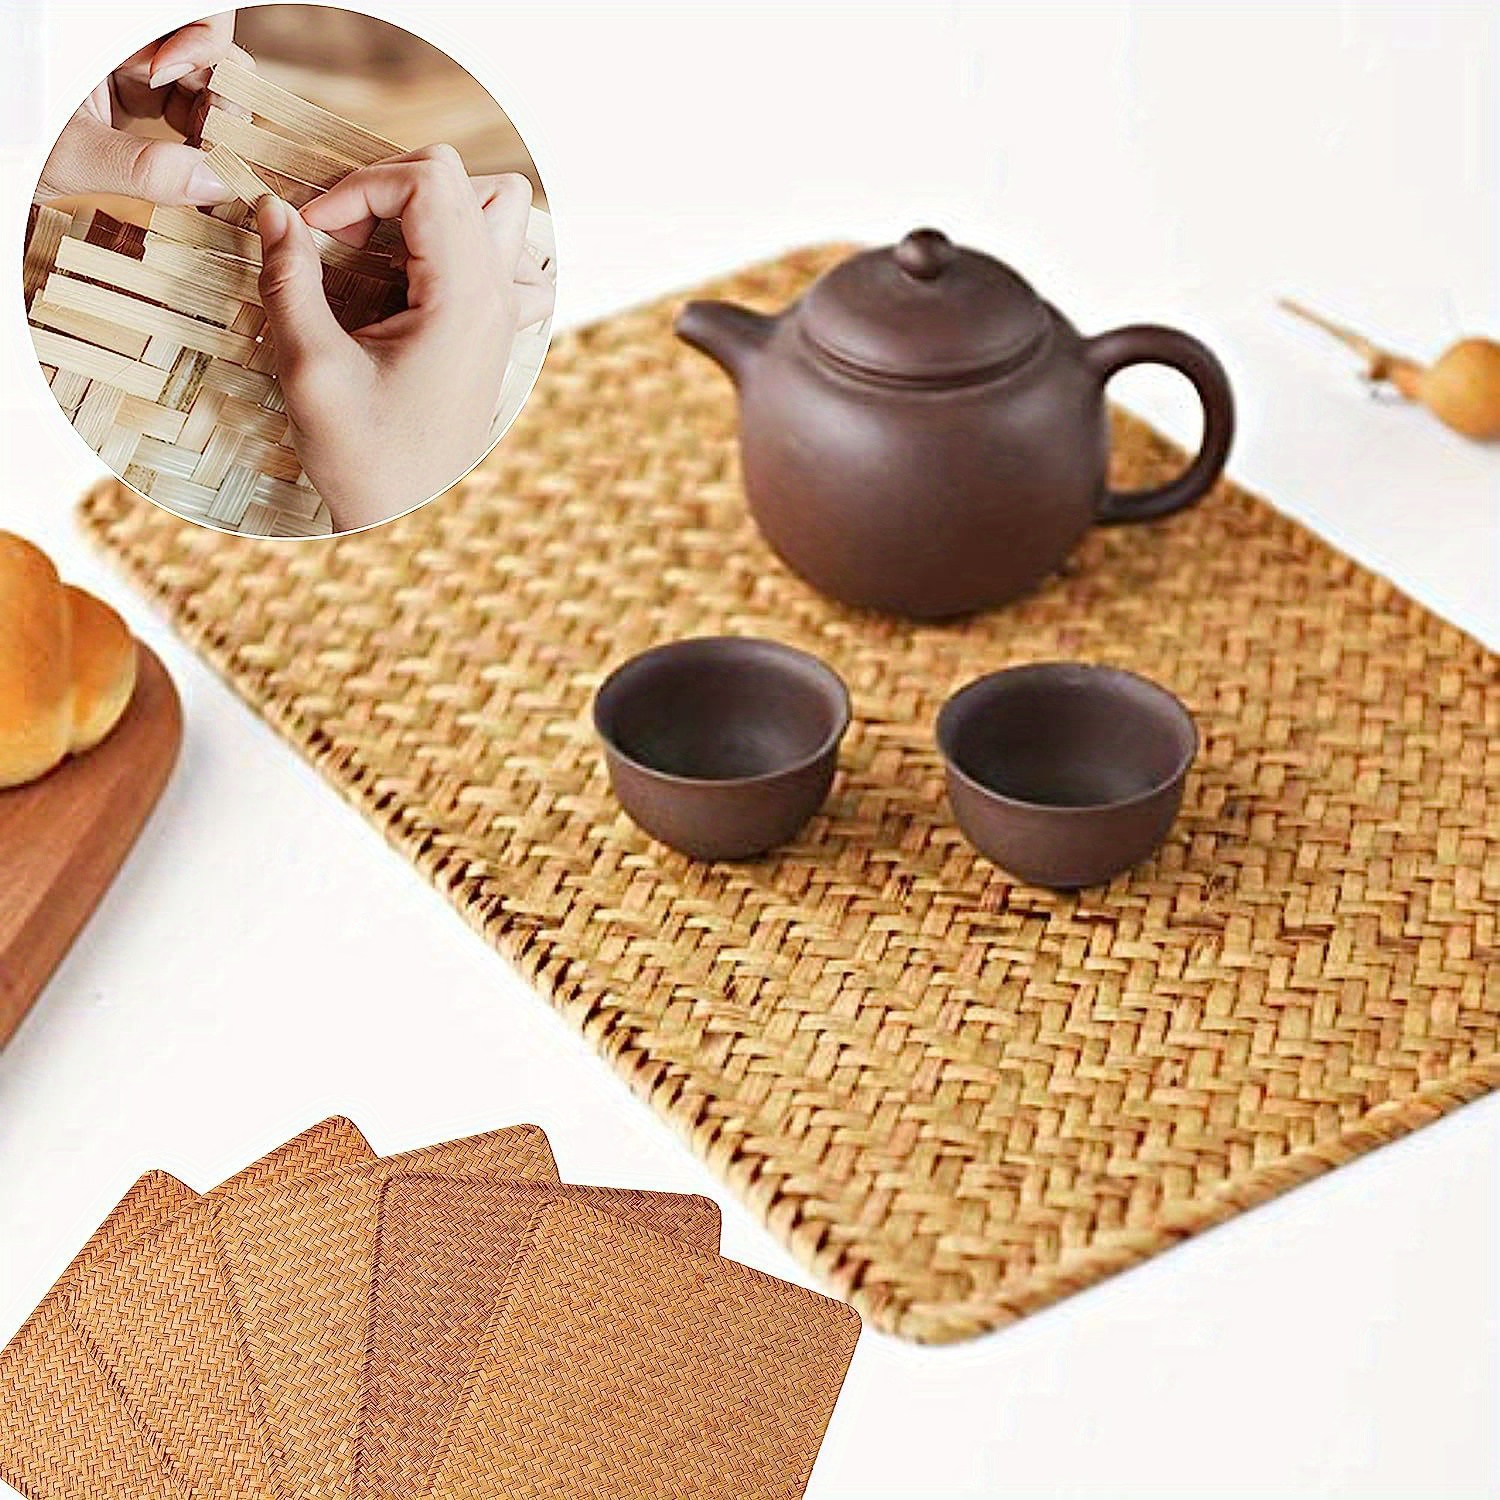 Travelwant Flexible Wheat Straw Cutting Board Mats in Unique